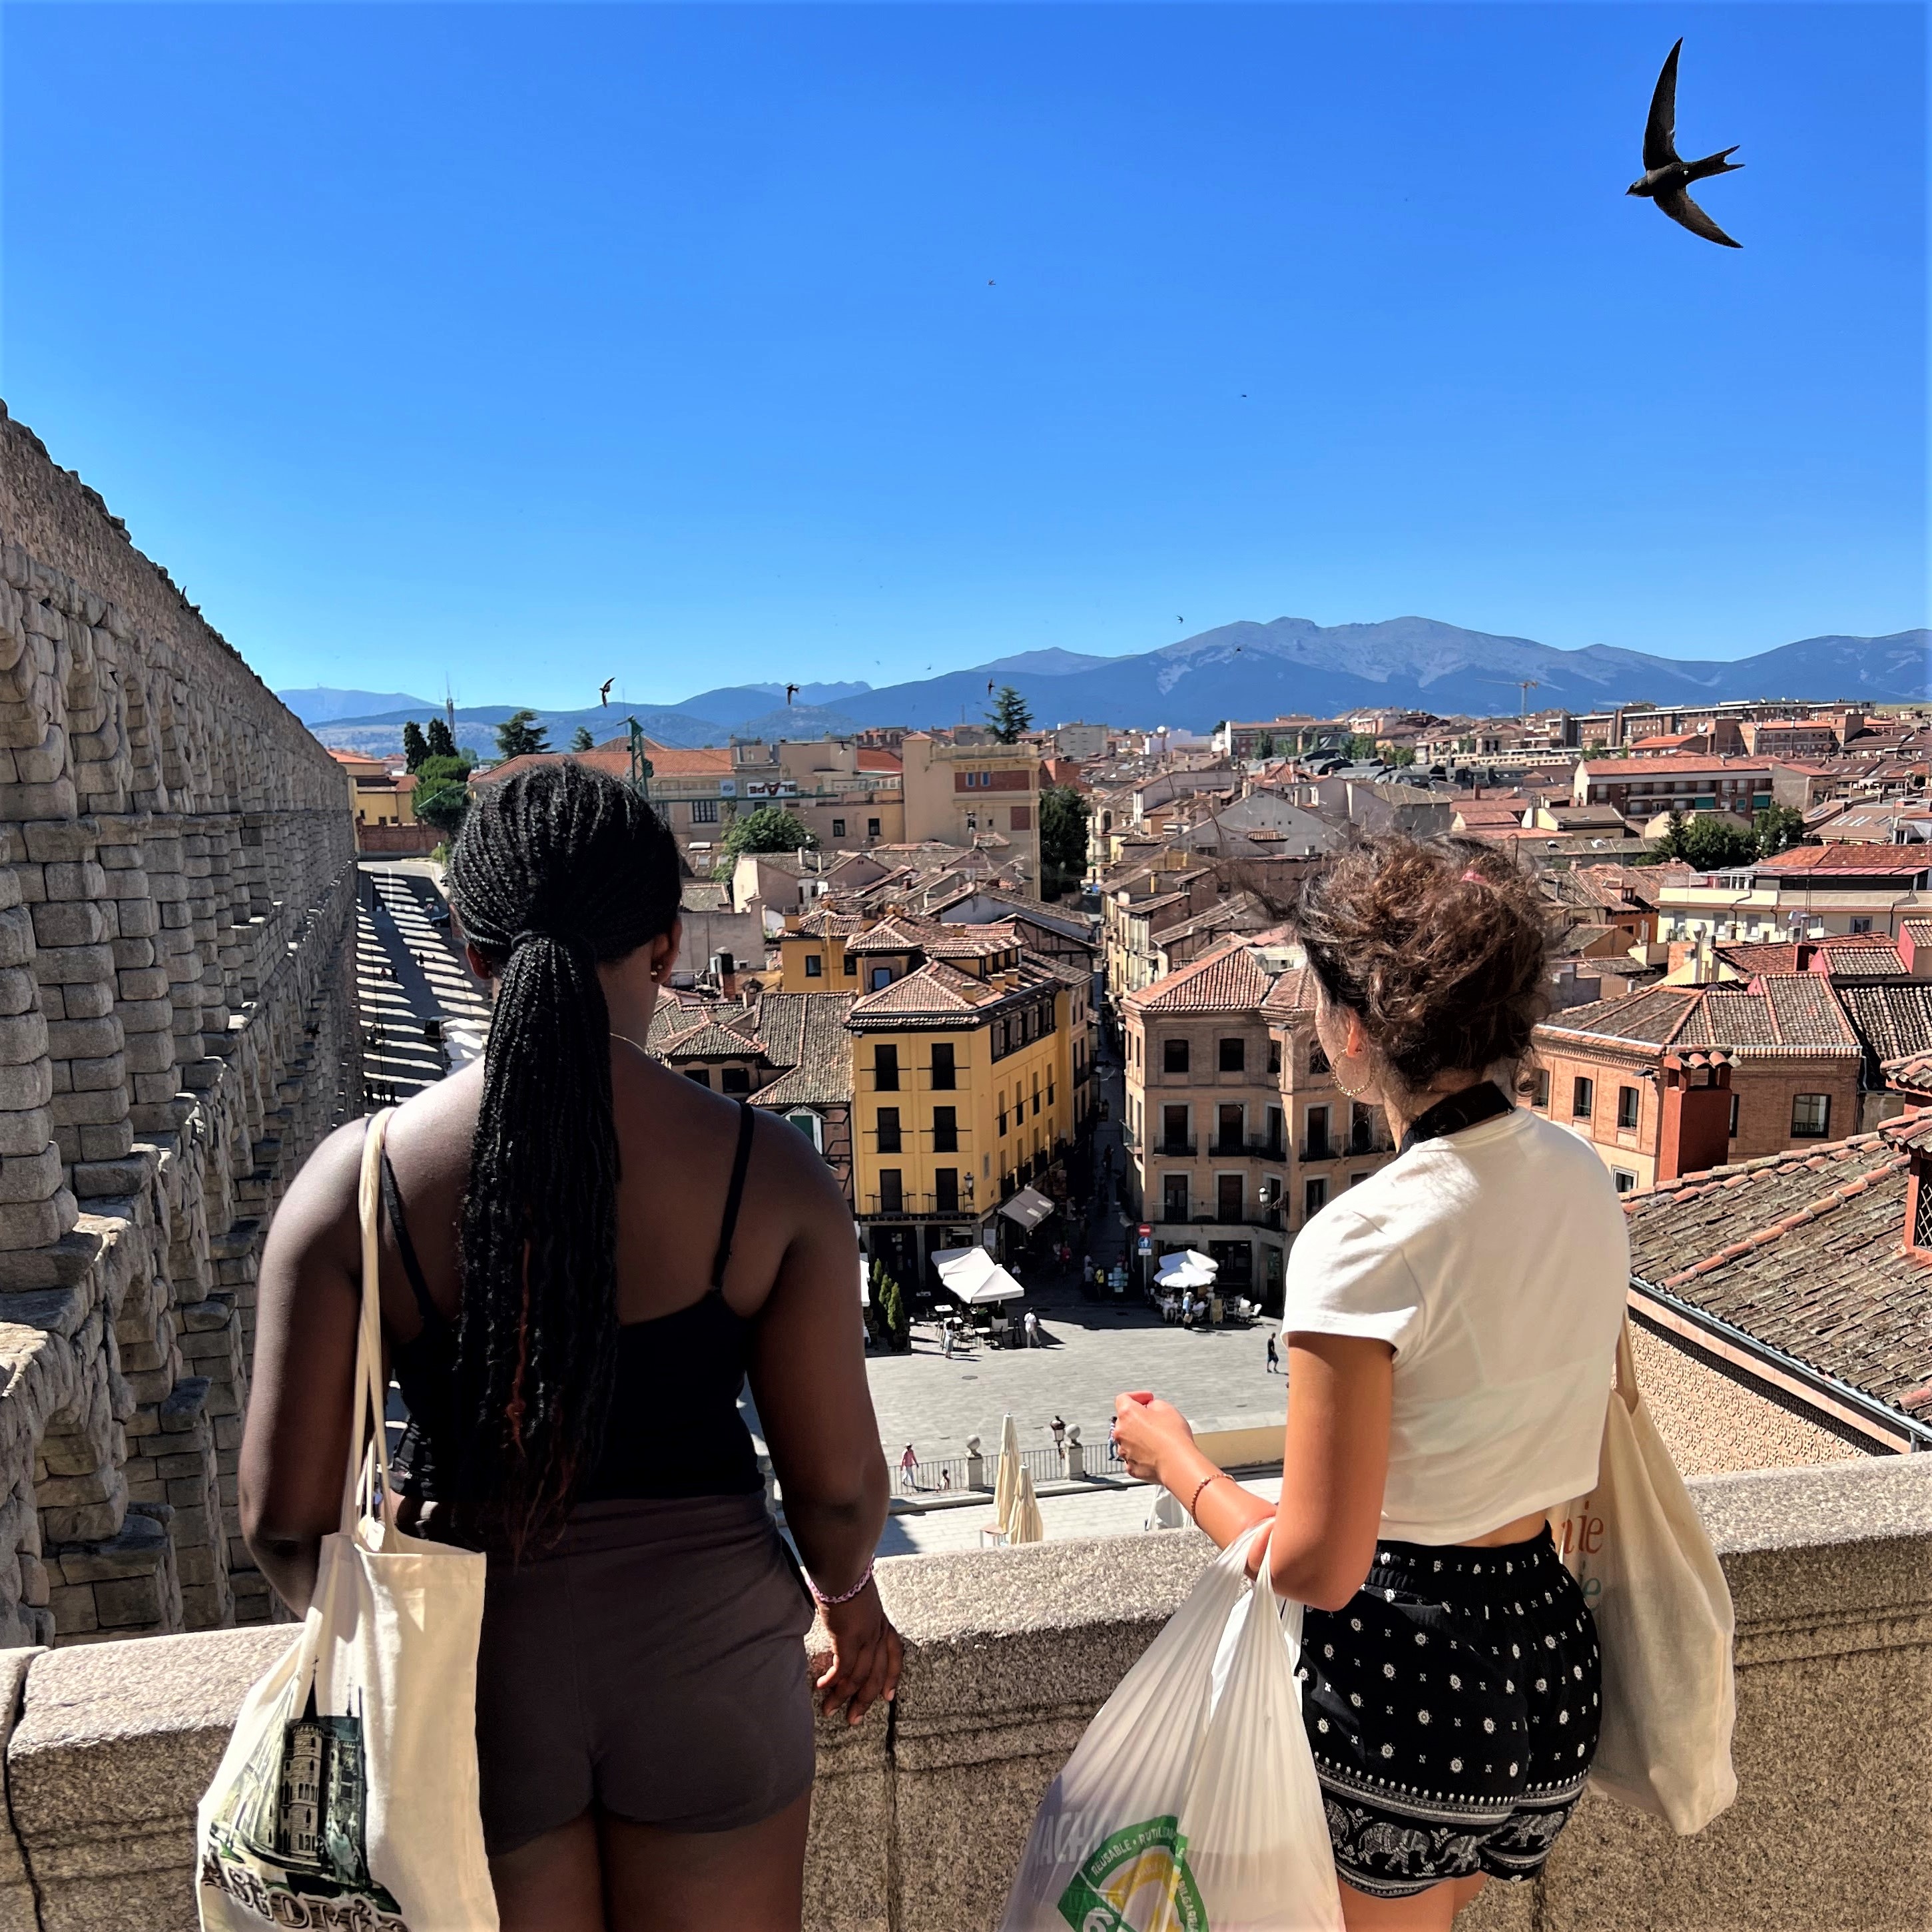 Two students look out on a Spanish city as a bird flies above